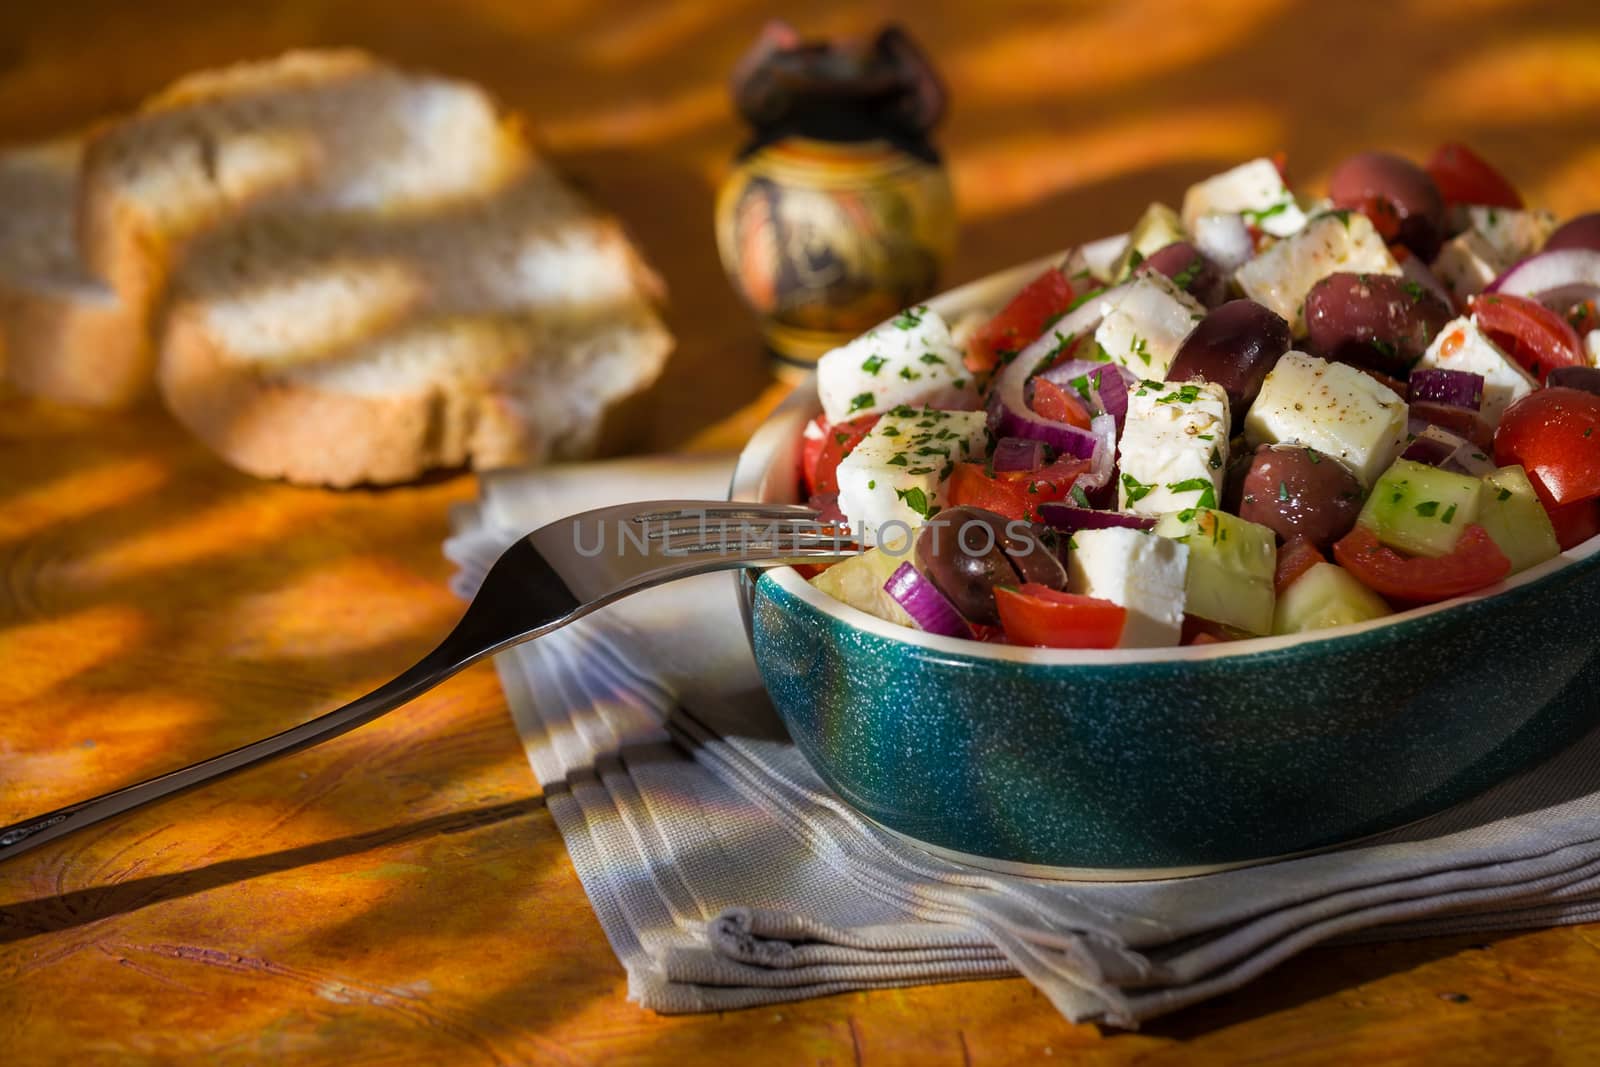 Greek salad with feta cheese tomatoes cucumber olives and onions with greek amphora and bread over a colored background